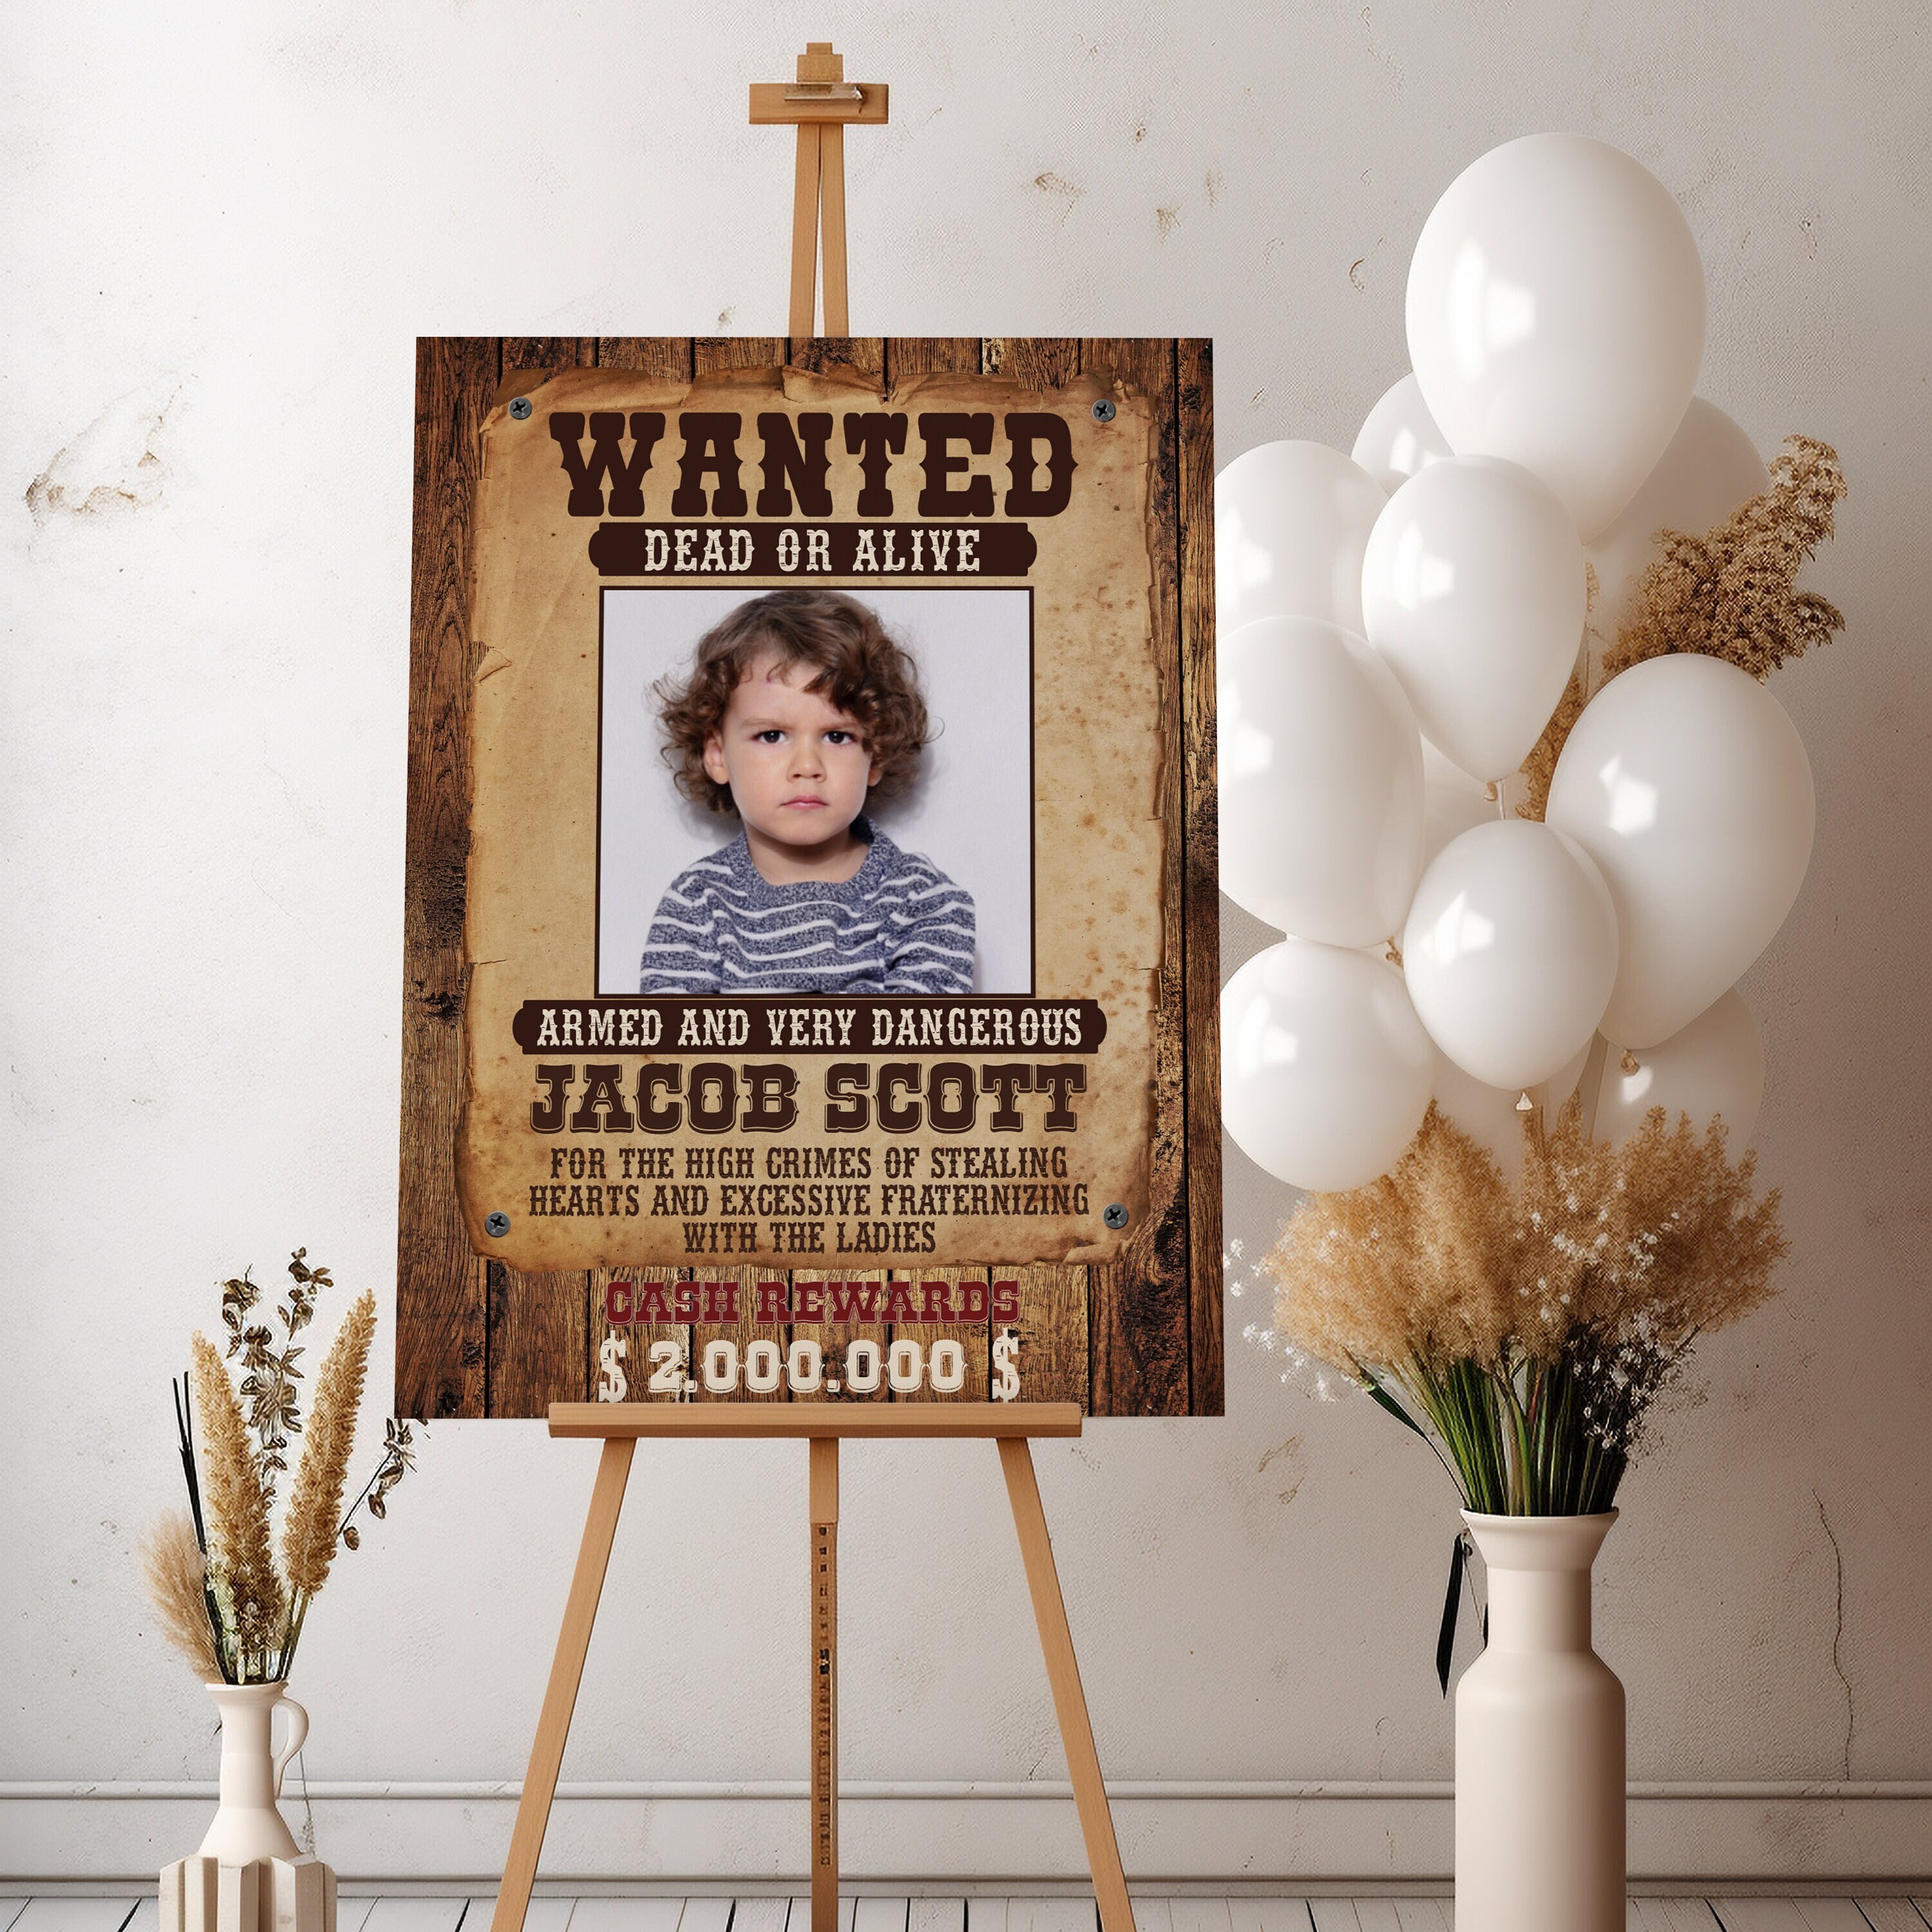 10+ One Piece Wanted Posters - Free Printable Templates in Word, PDF,  Vector EPS